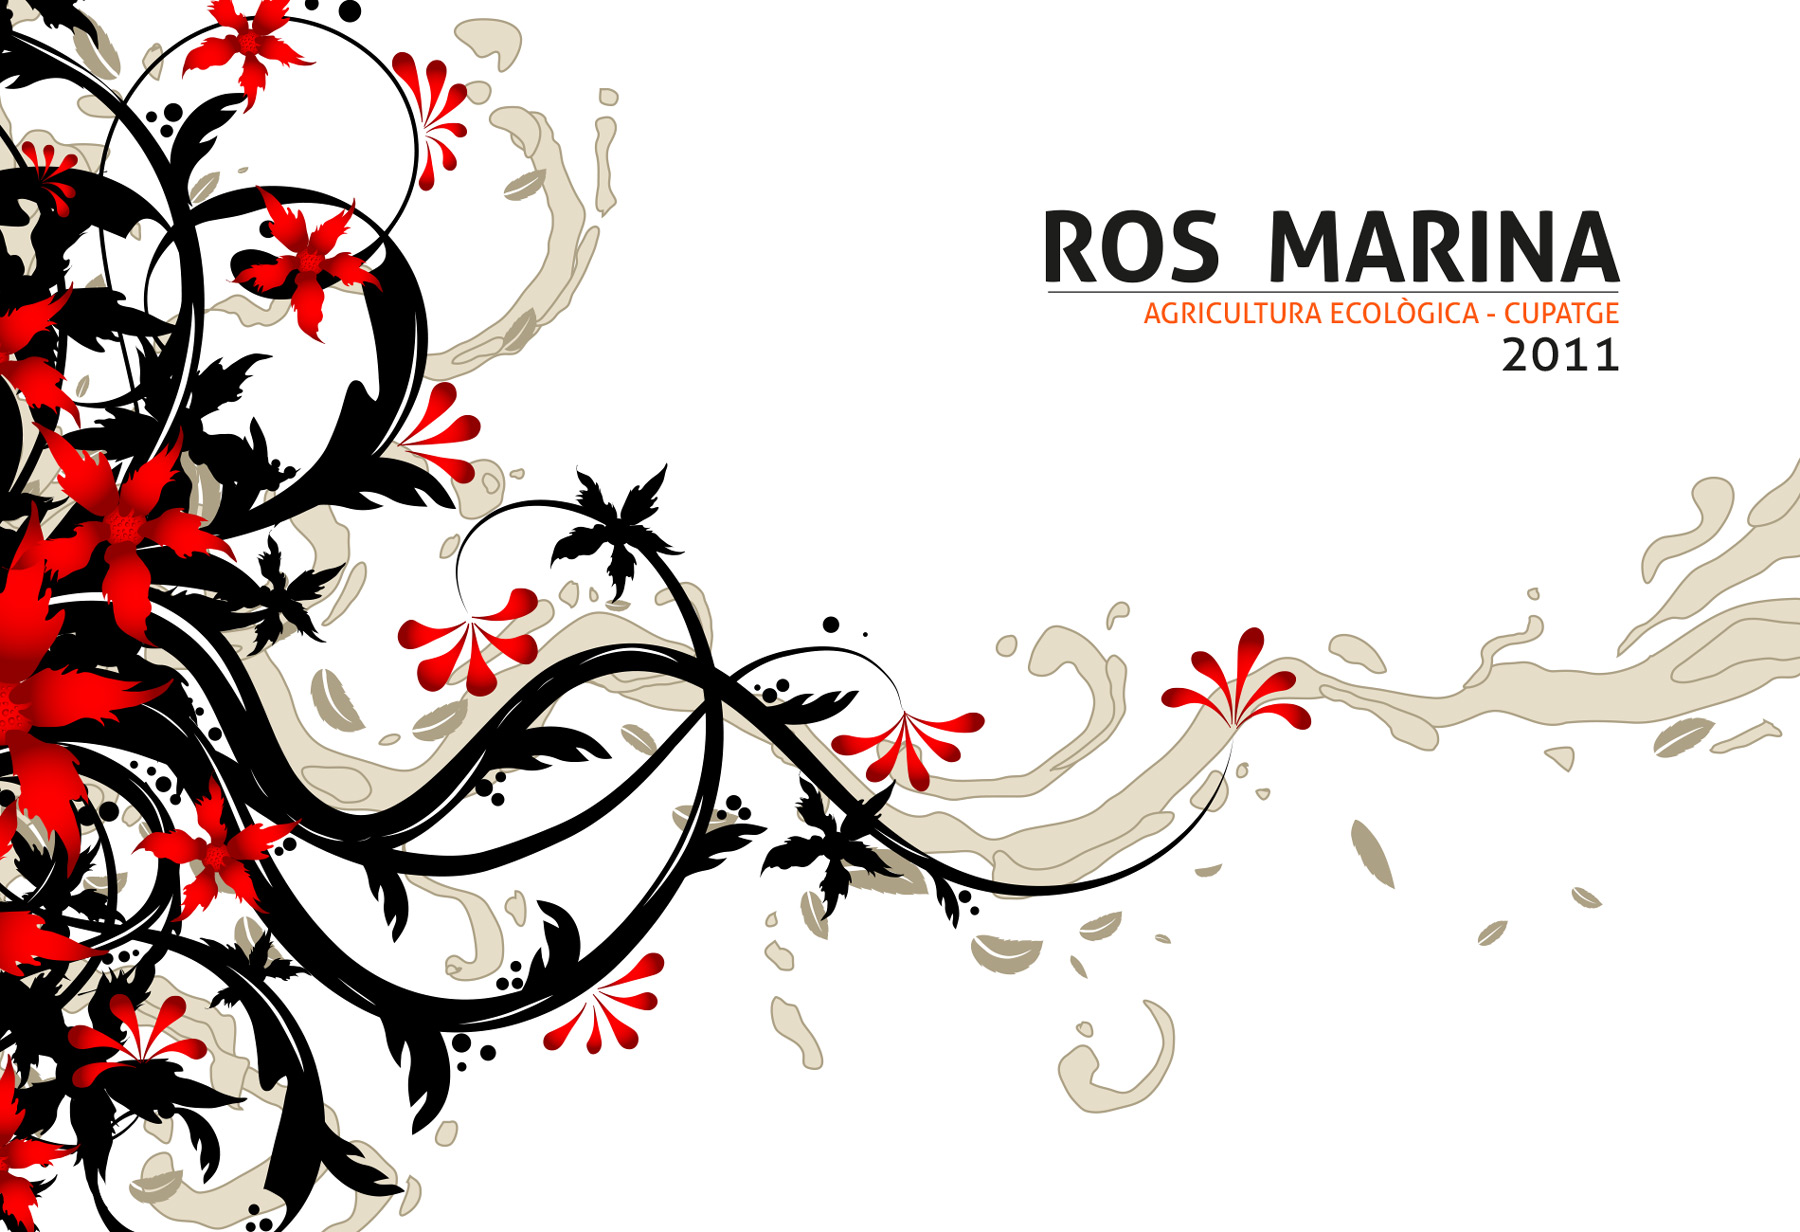 Portfolio of graphic and creative design works on wine labels and packaging for organic wine: ROS MARINA